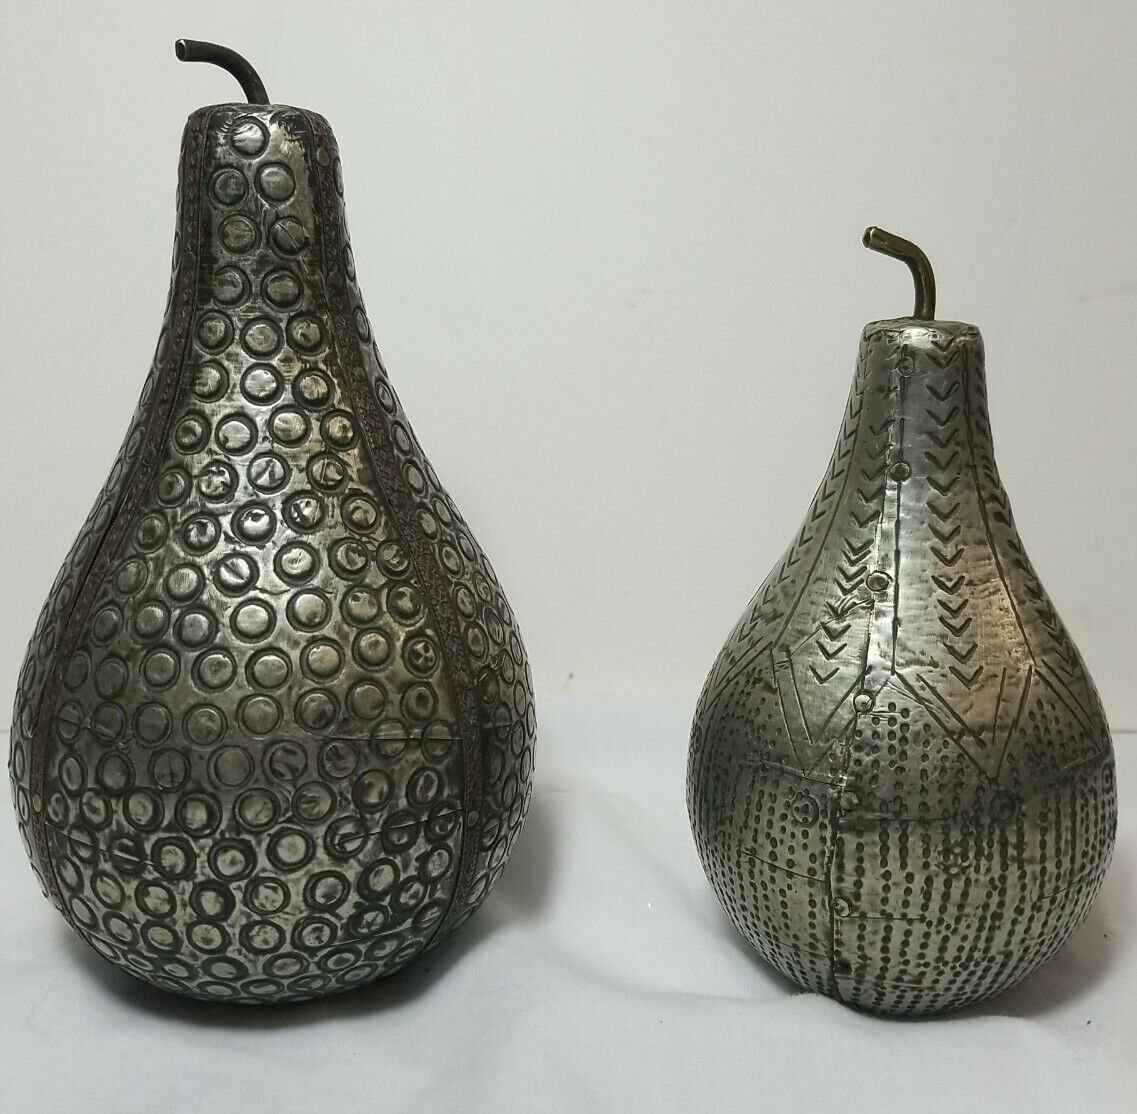 Rustic Collectible Hammered Metal Decretive Pears (2) 4.5 in. and 5.75 in. Unbranded